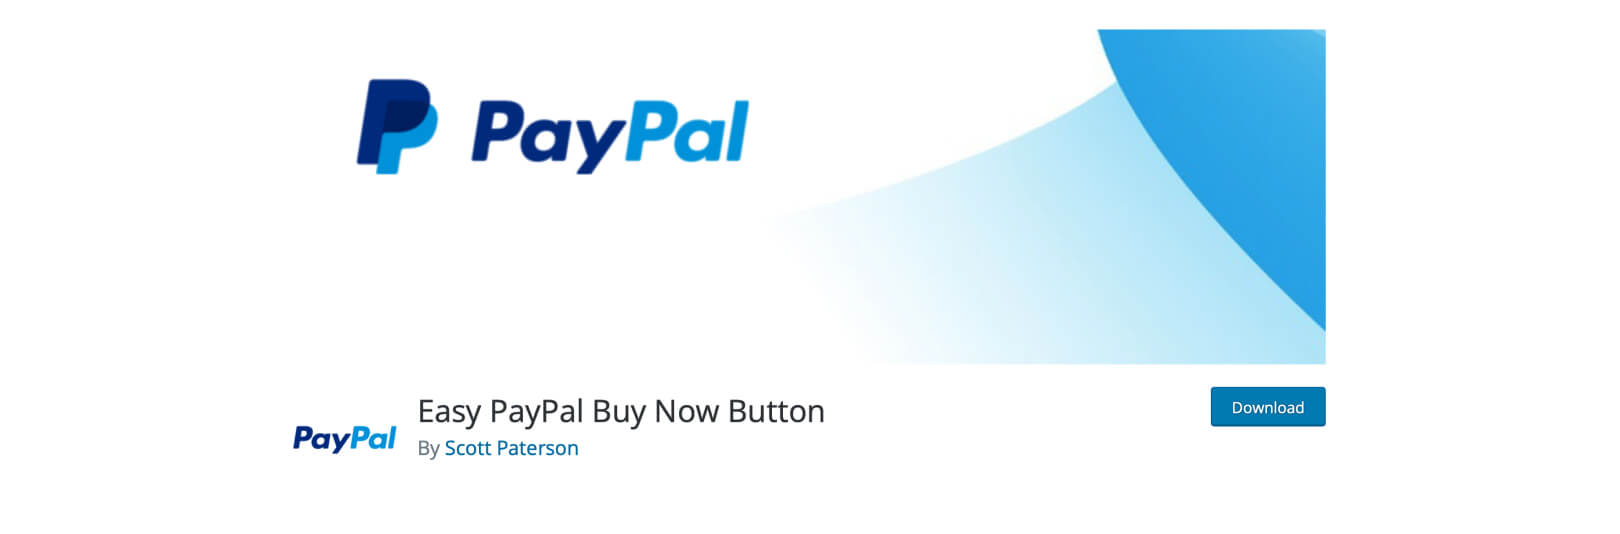 Easy PayPal Buy Now Button